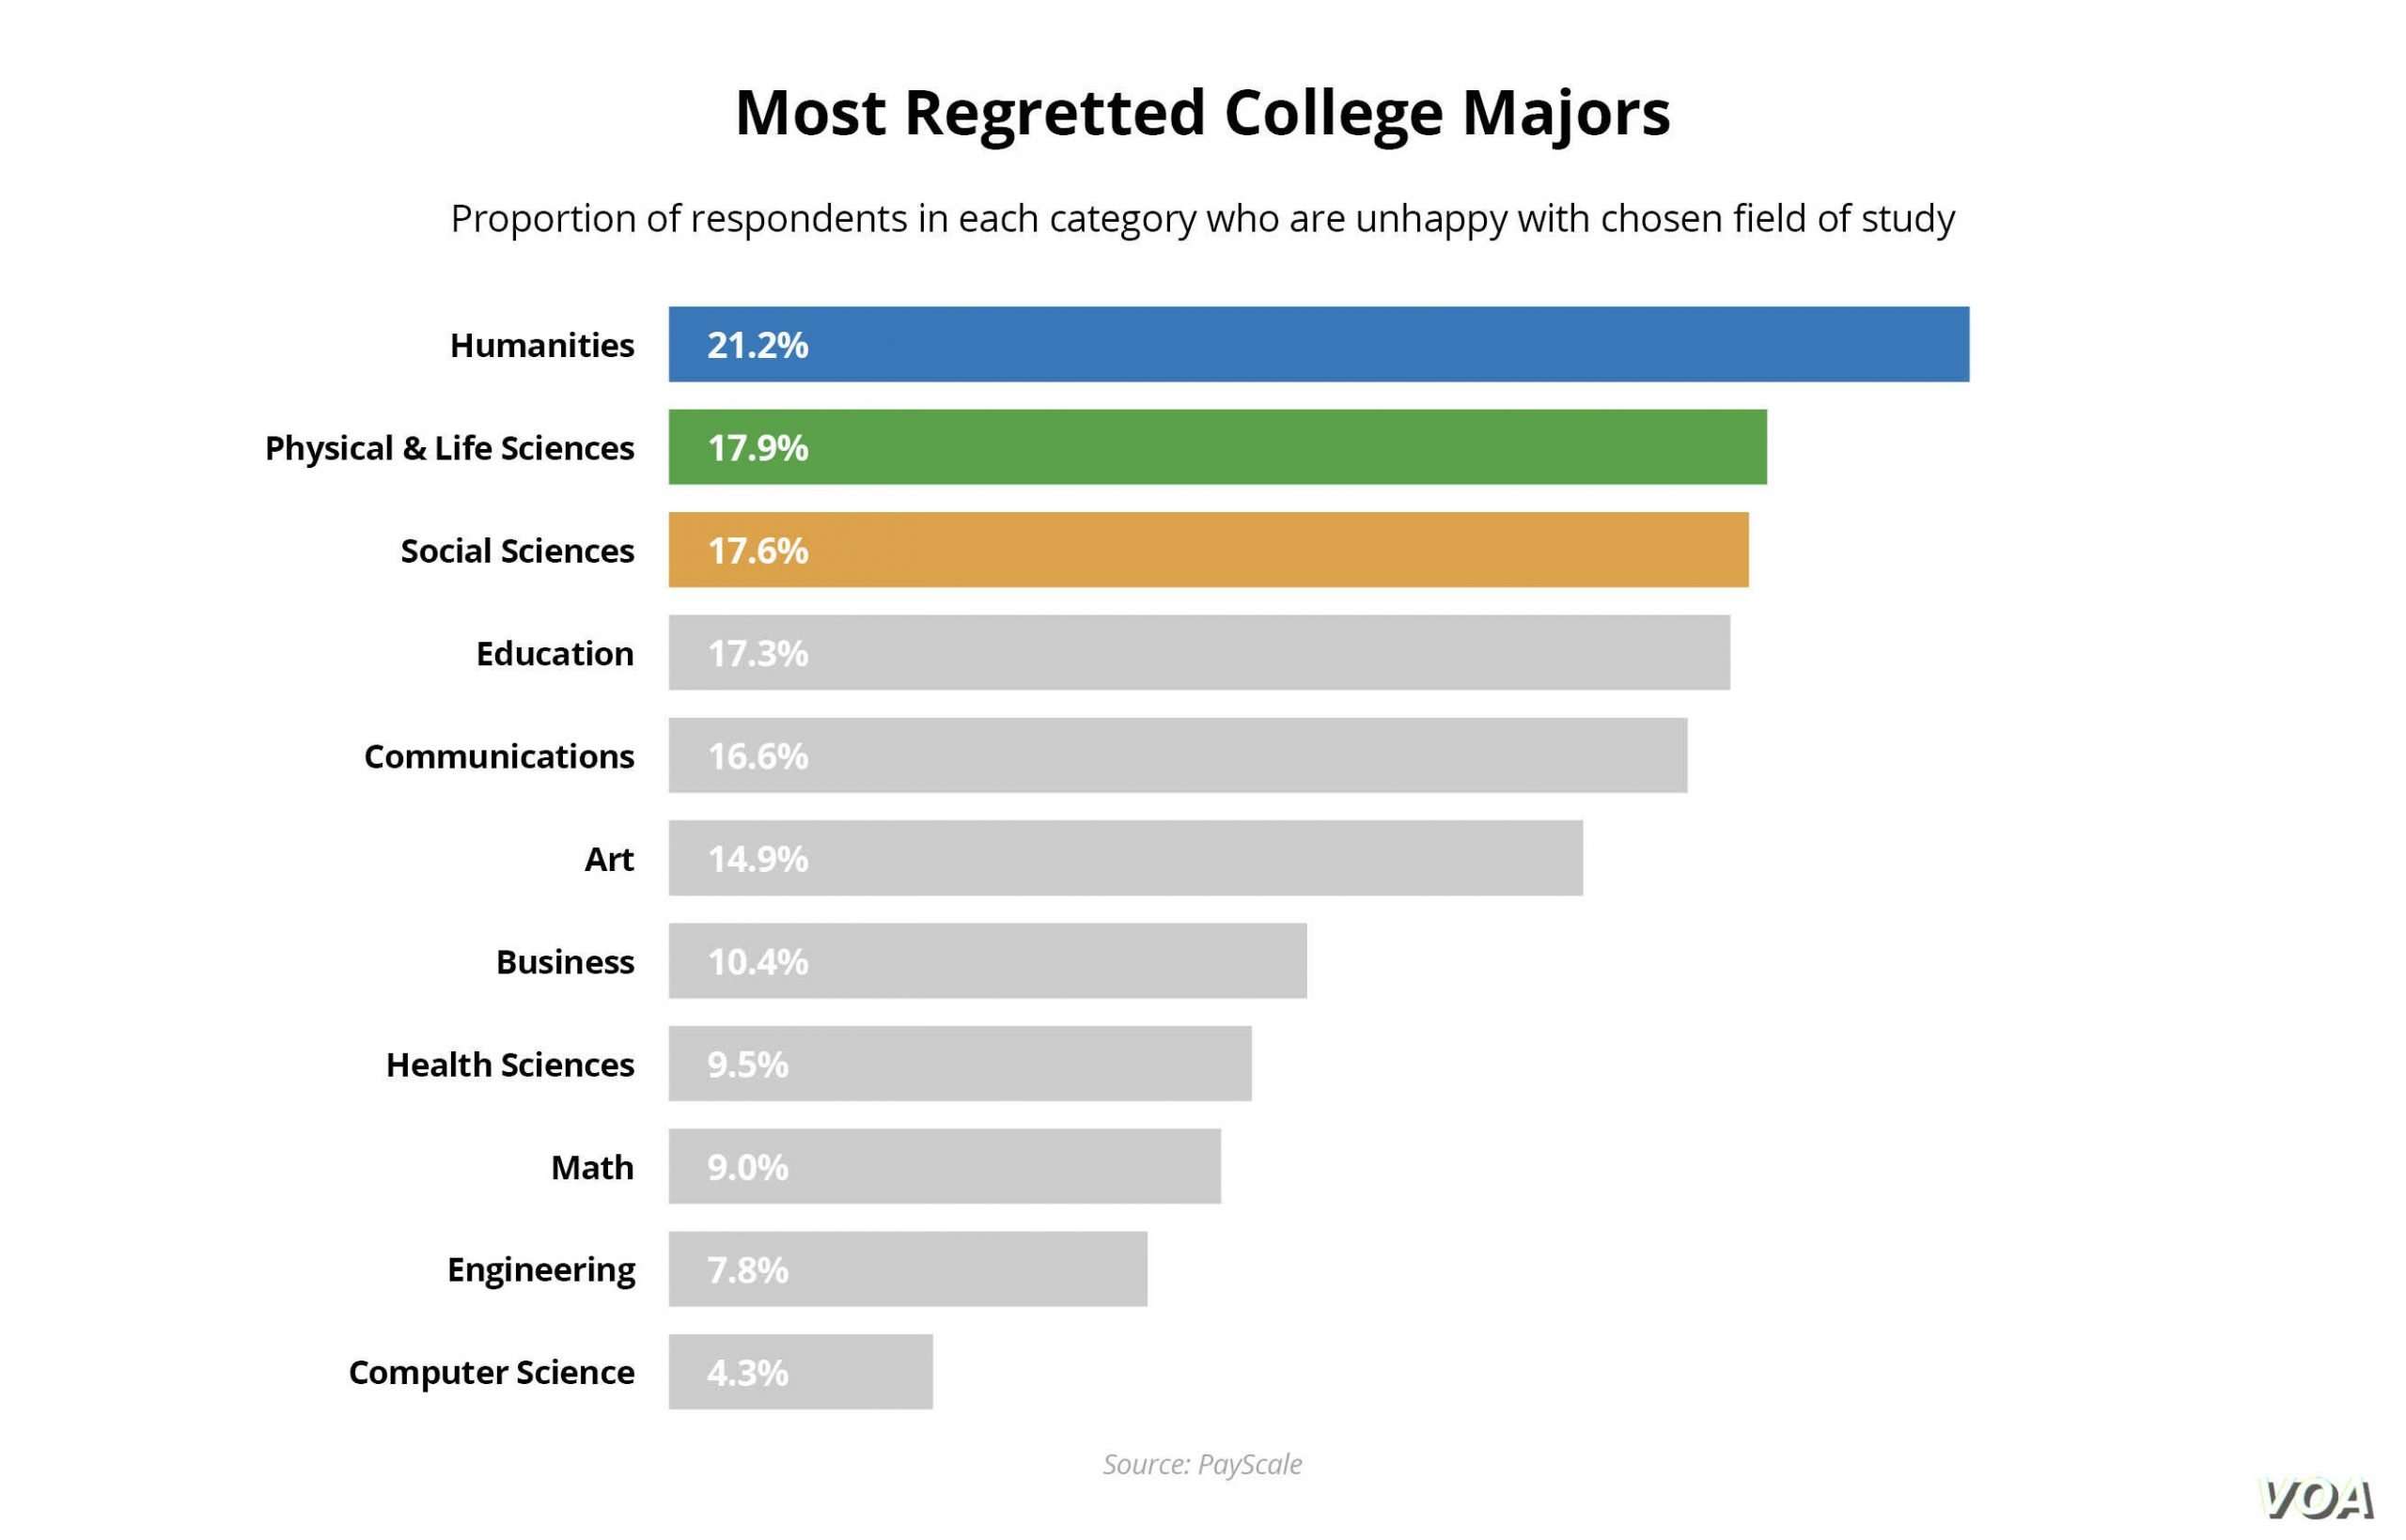 College Majors Americans Regret the Most